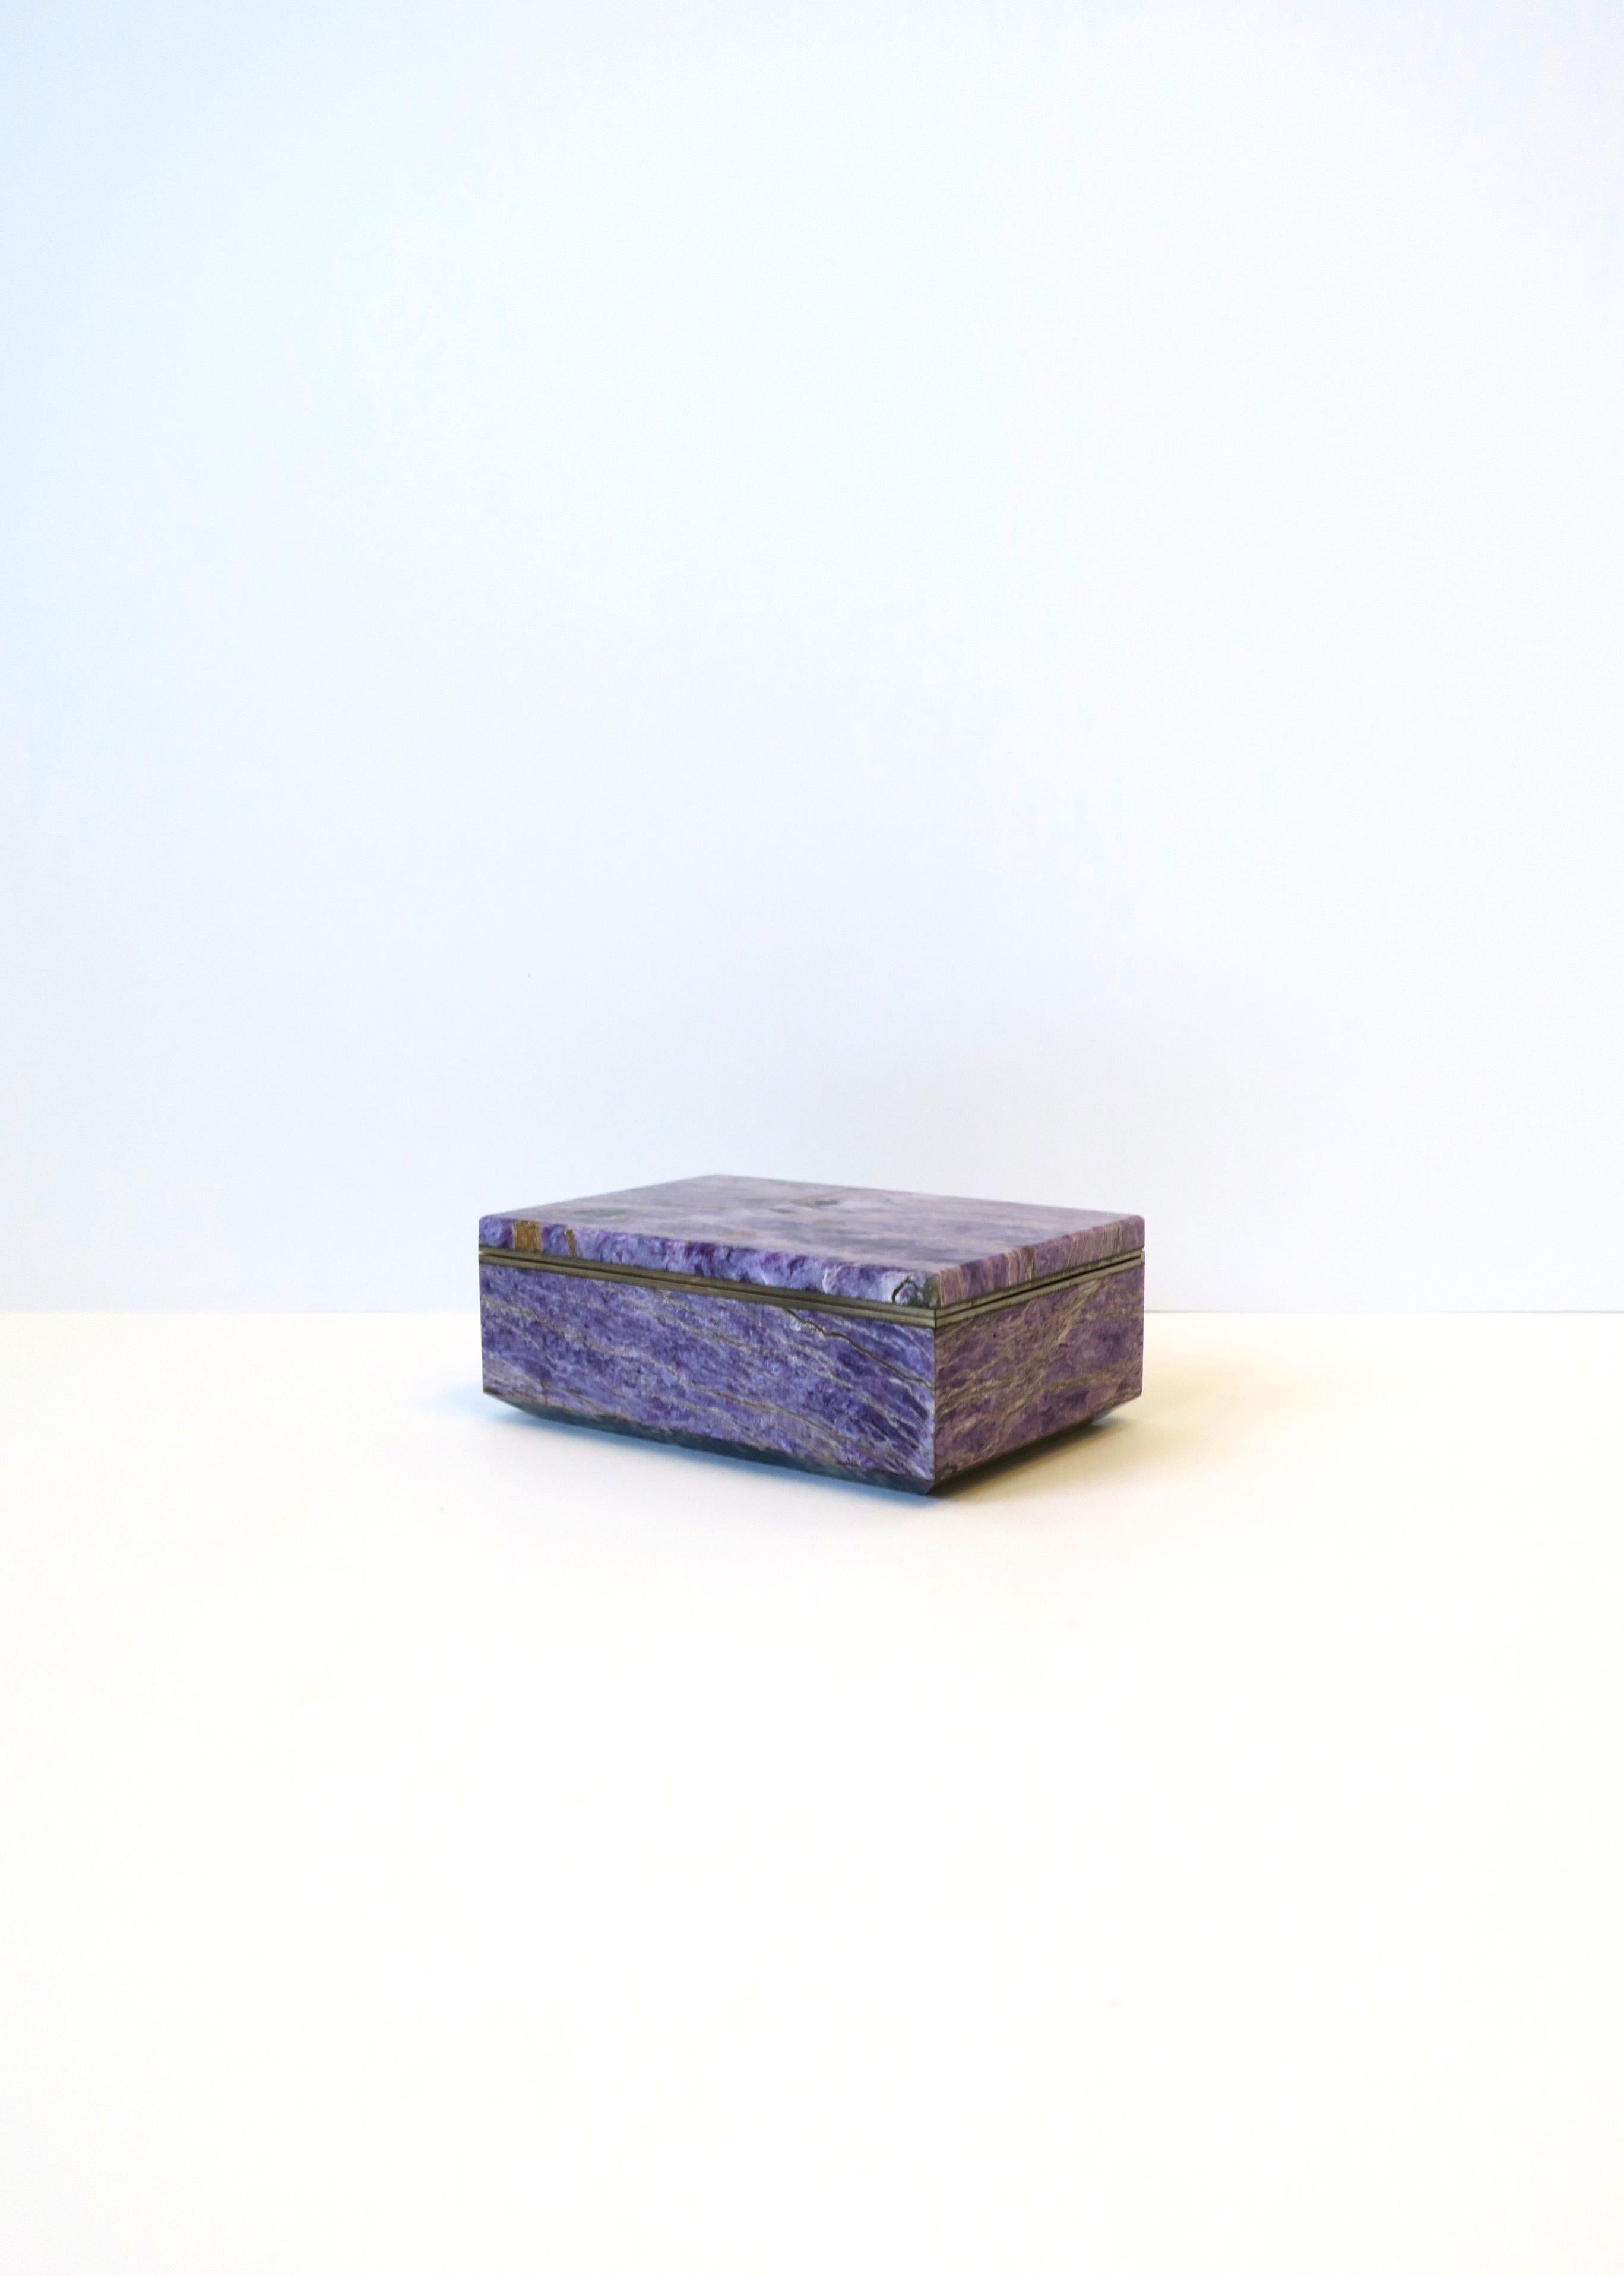 A very beautiful, substantial and rare natural purple charoite jewelry box, circa late-20th century. Charoite is rare mineral aka 'lilac stone'. A beautiful organic pattern graces this charoite stone; Piece is hand-made, polished smooth with